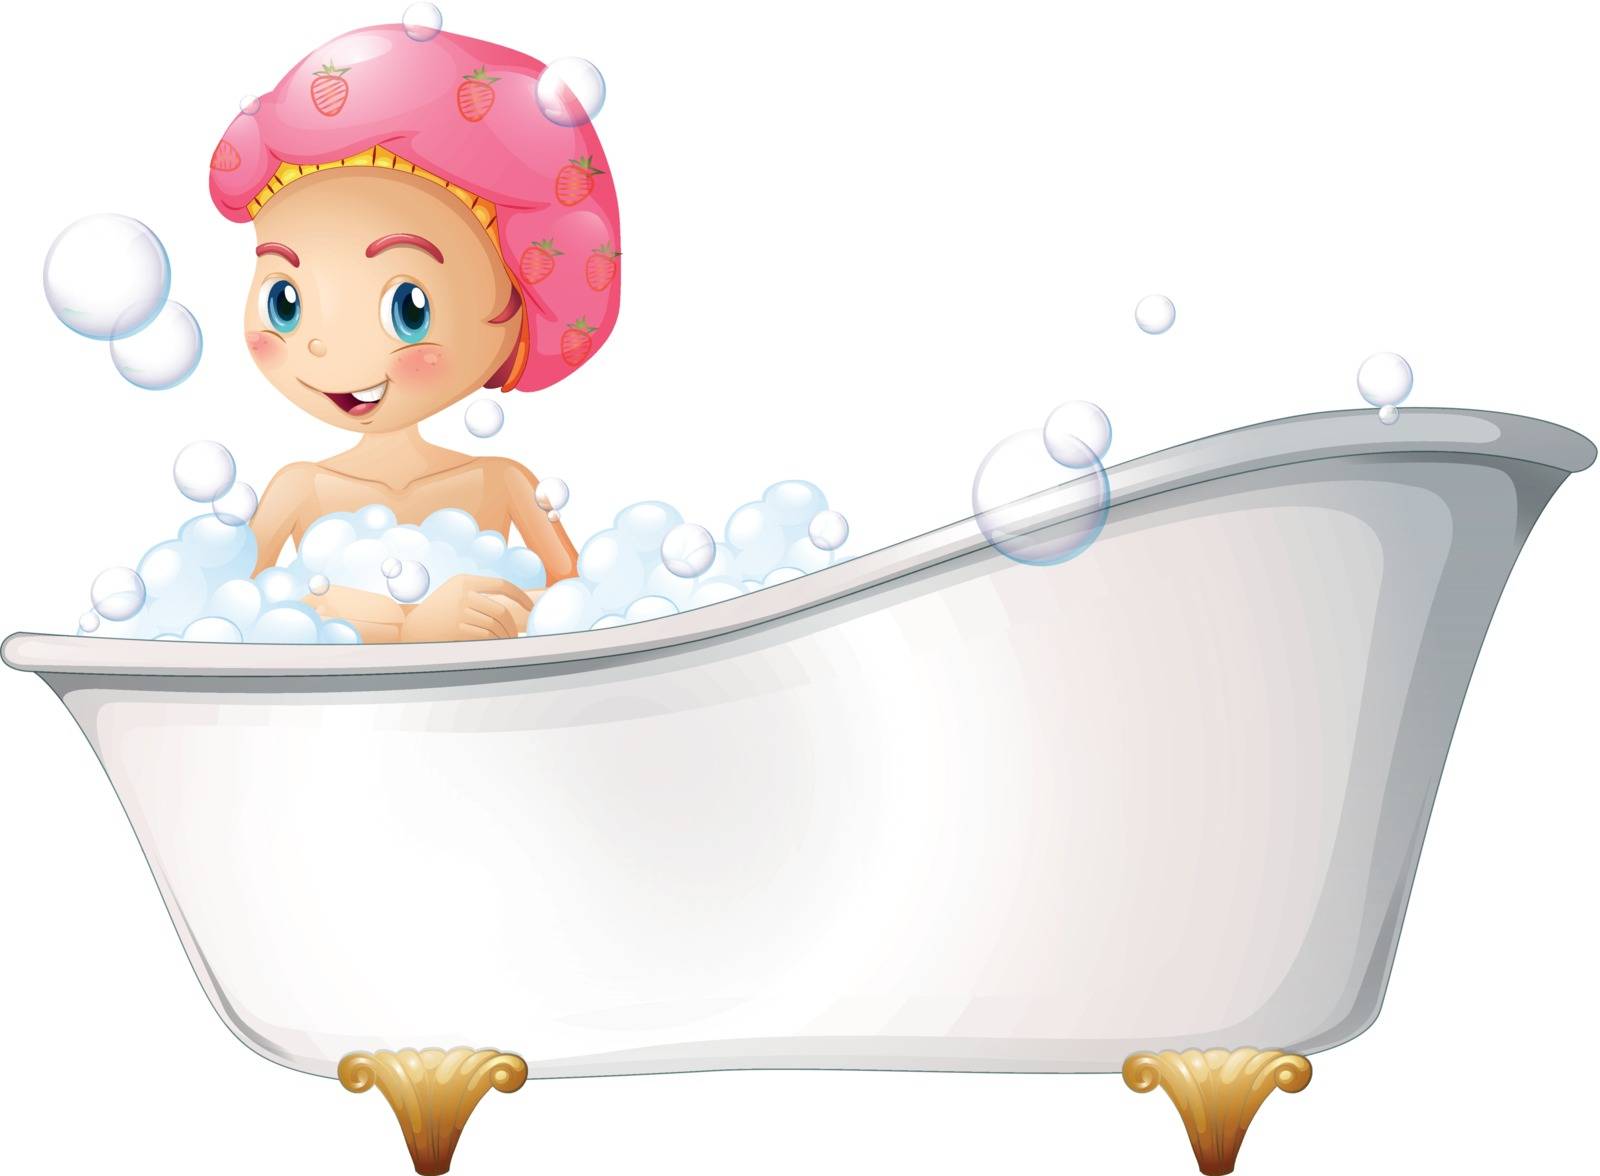 A young girl taking a bath by iimages